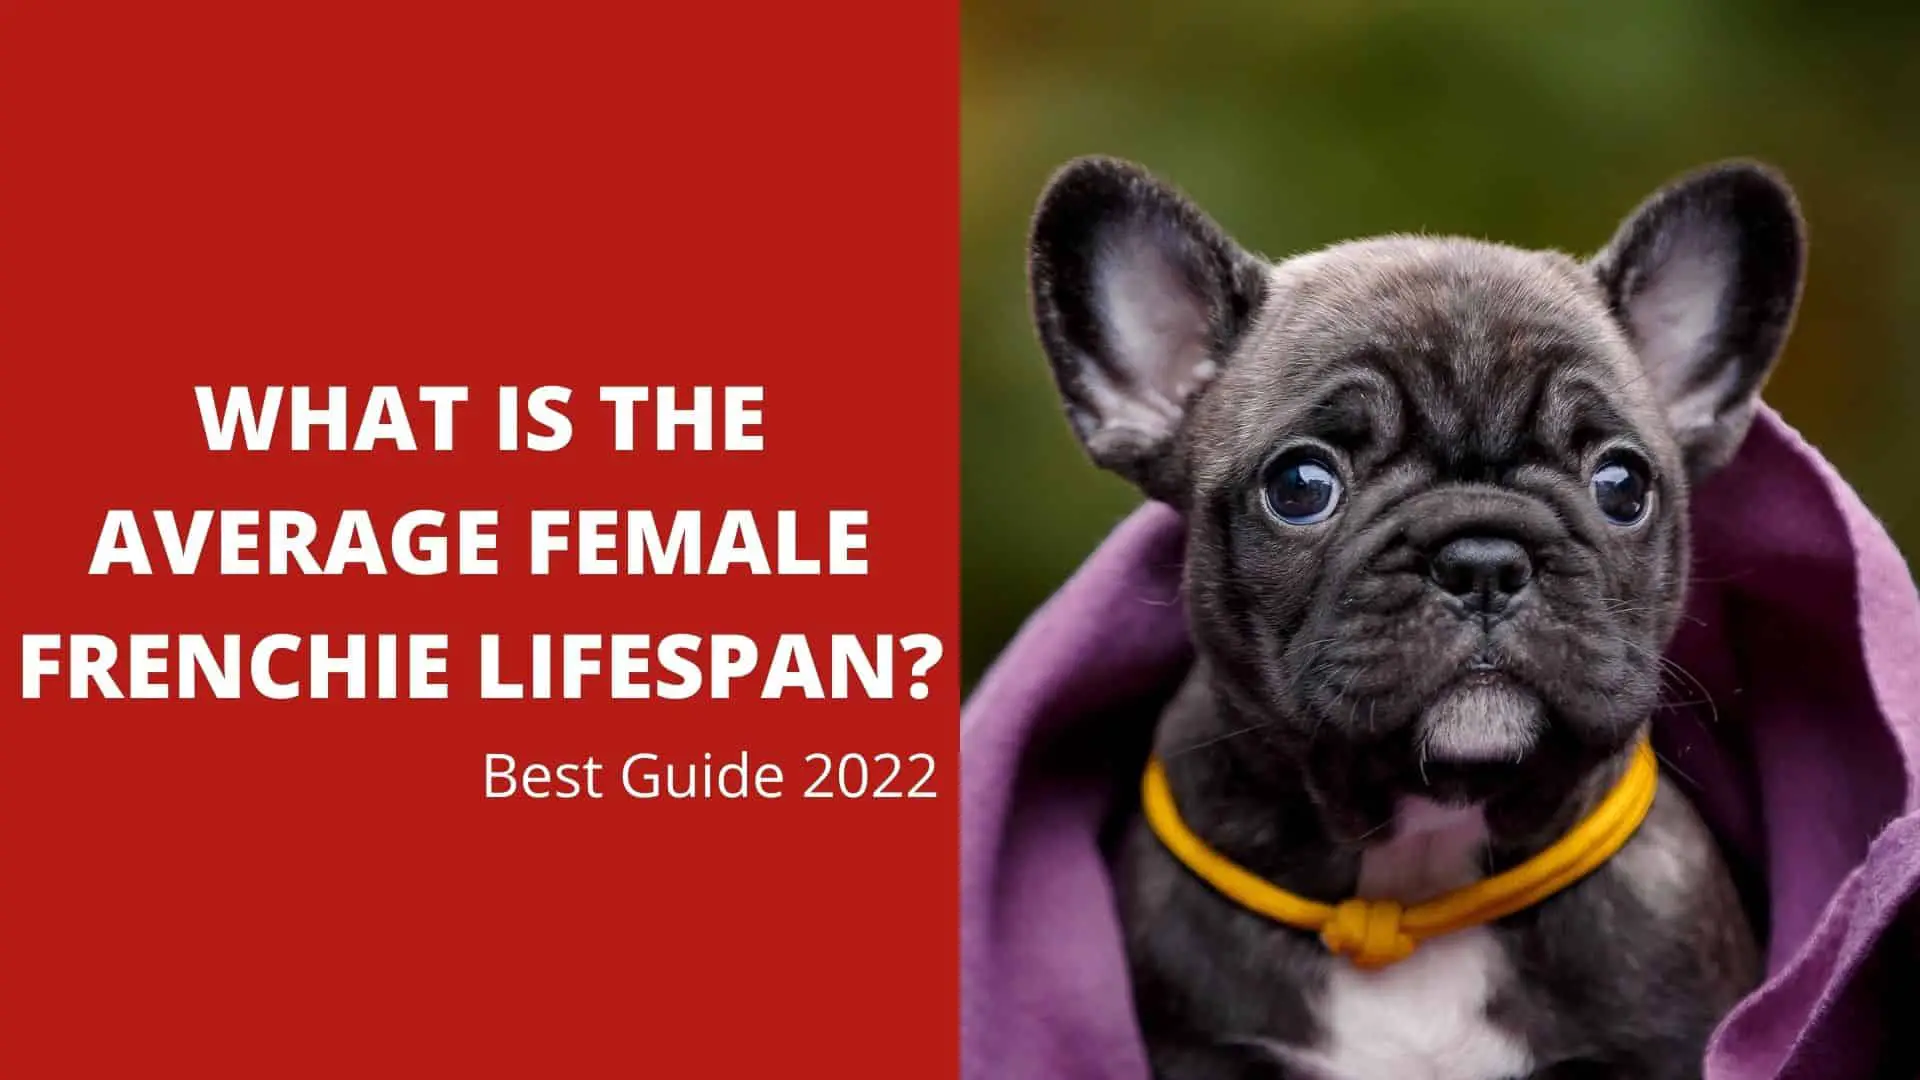 What Is the Average Female Frenchie Lifespan? Best Guide 2022